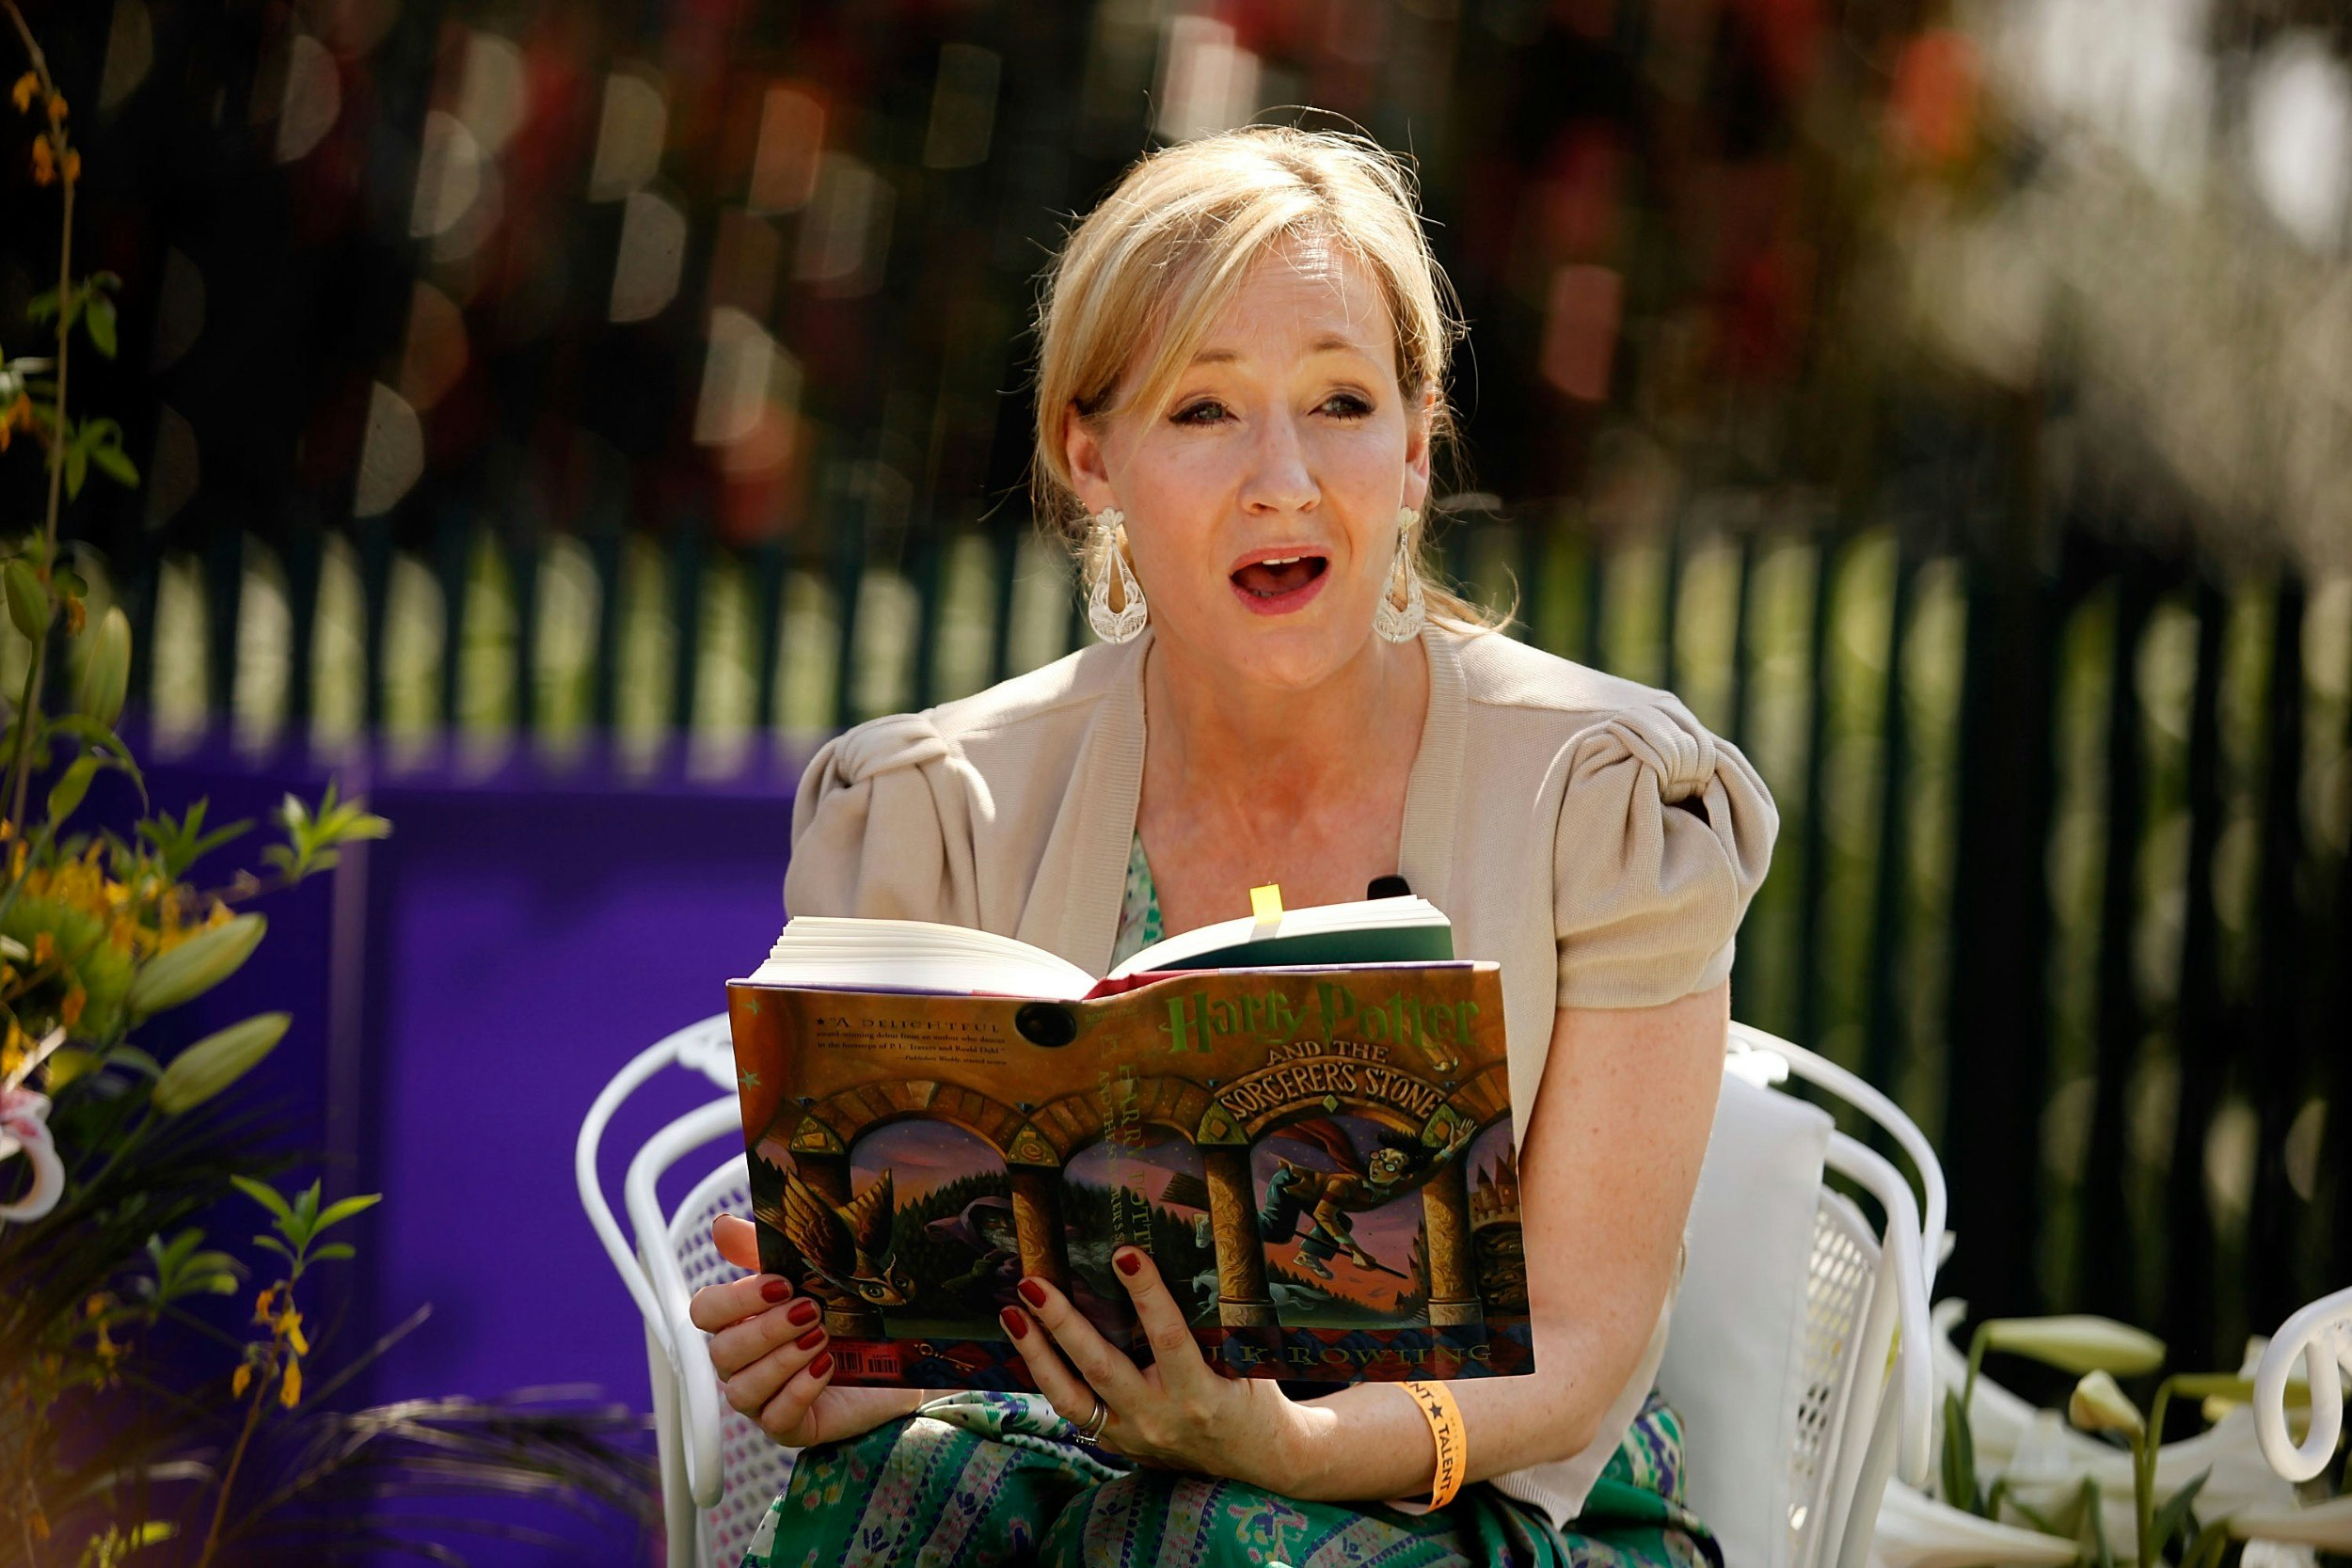 JK Rowling reading a Harry Potter boo while sitting on a bench